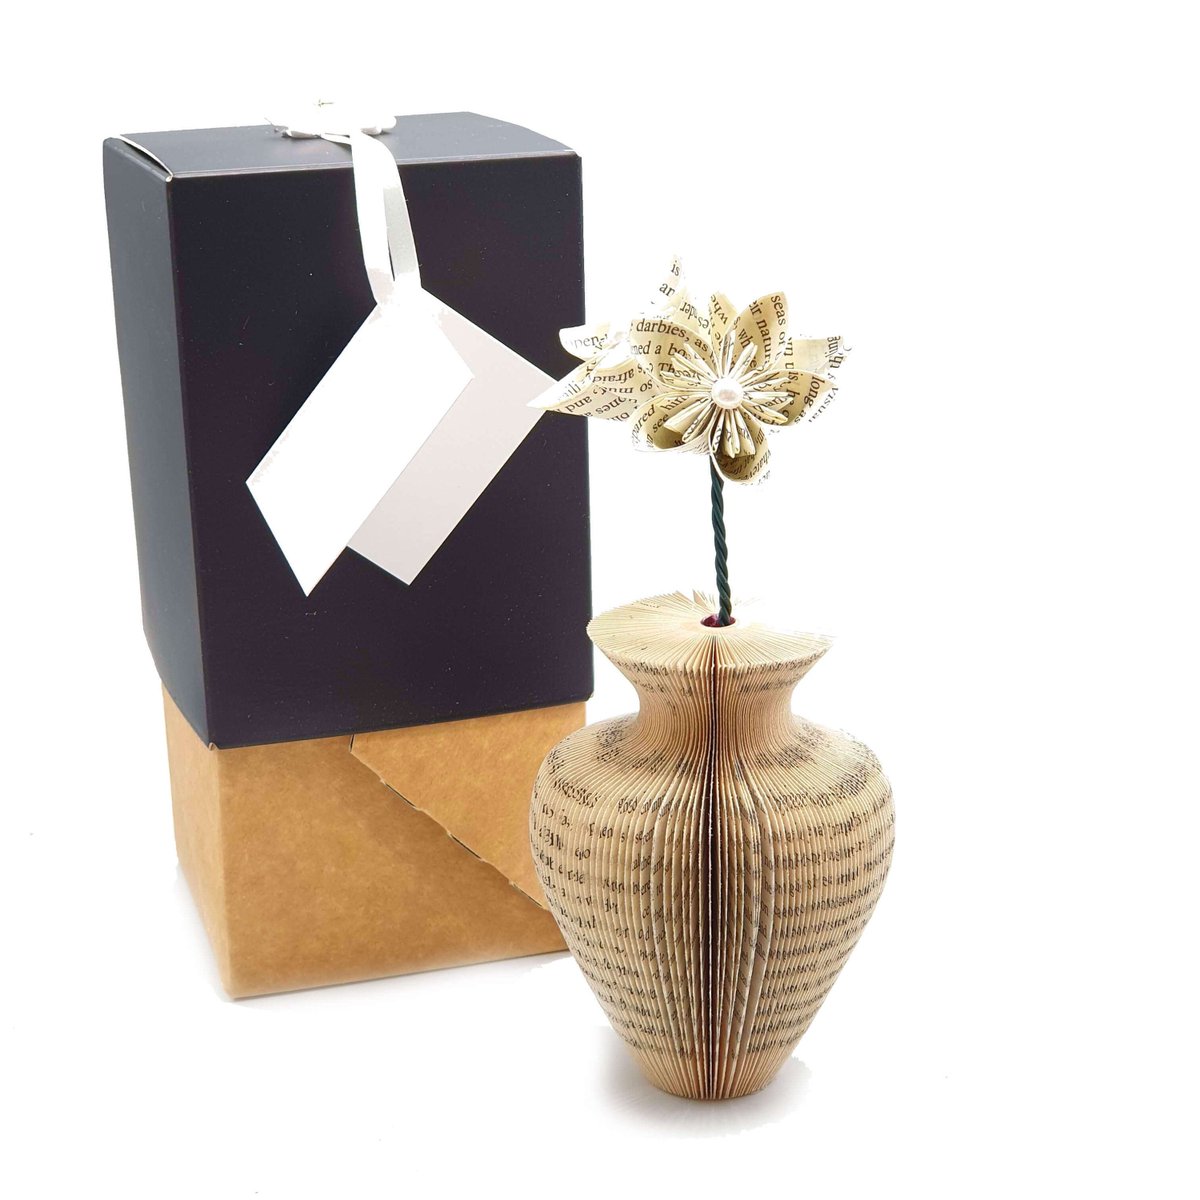 Mini Urn Vase and Flowers Book Gift creatoncrafts.com/products/mini-… #mhhsbd #RecycledBooks